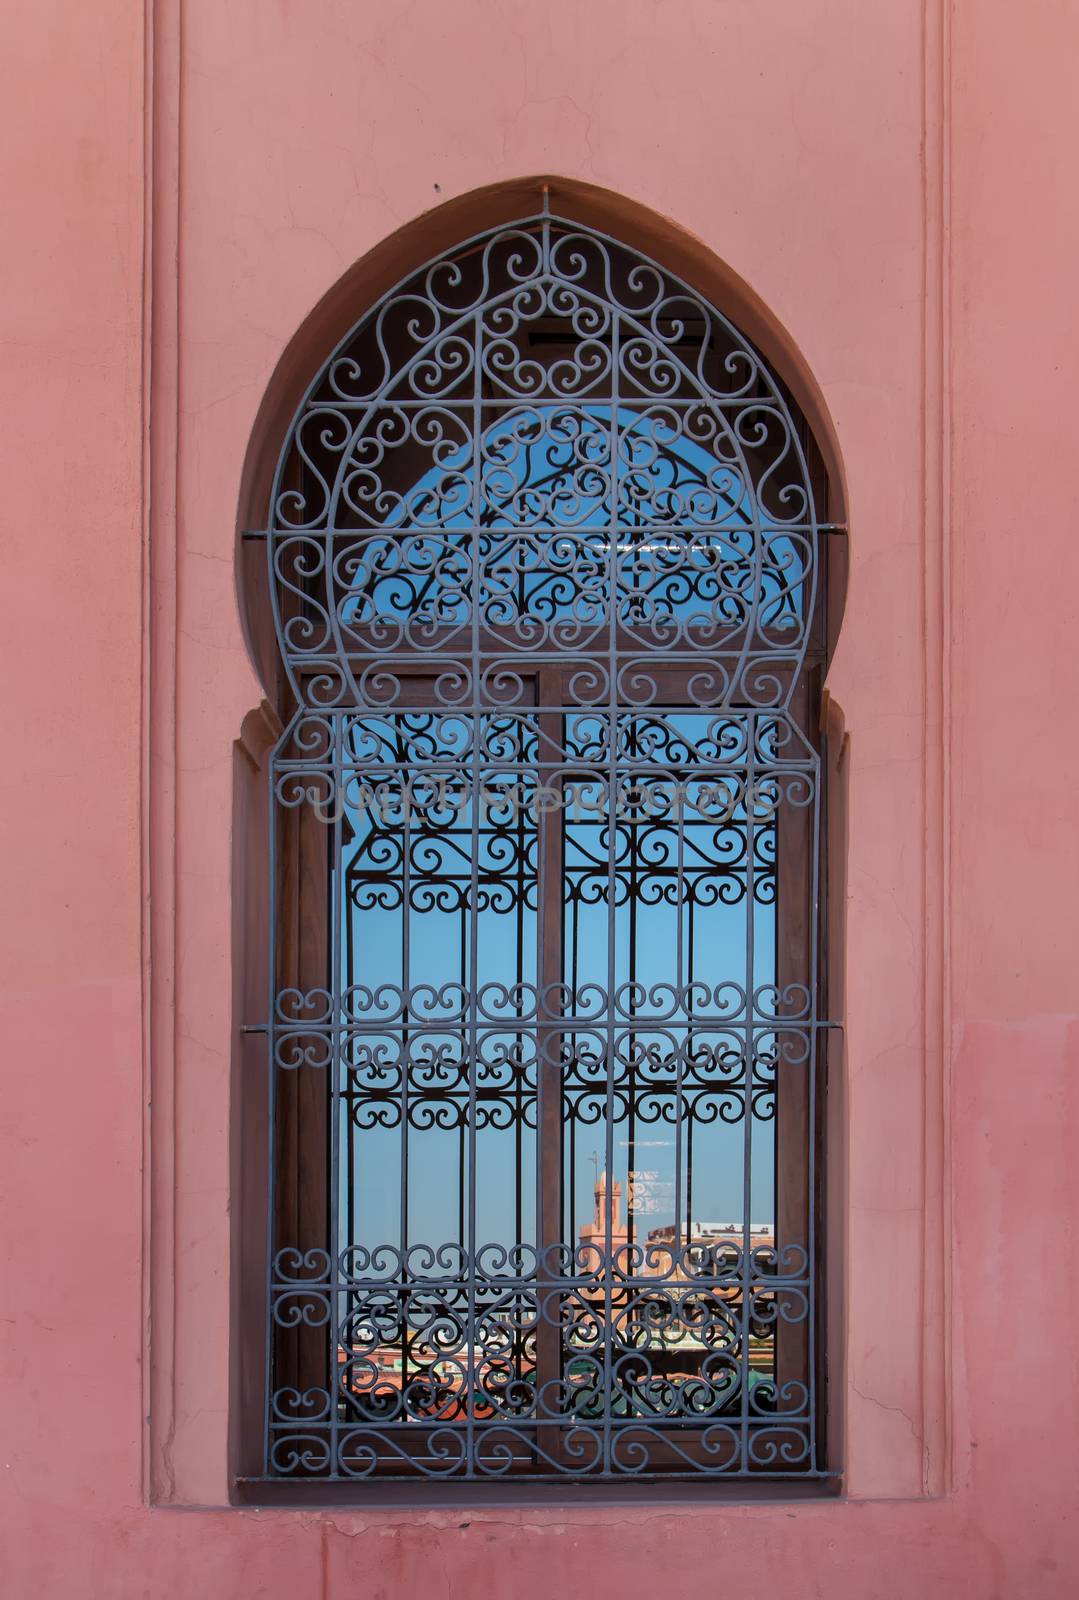 Arch of the traditional arabian window with a reflection of the famous square Jamaa el Fna and a blue sky.